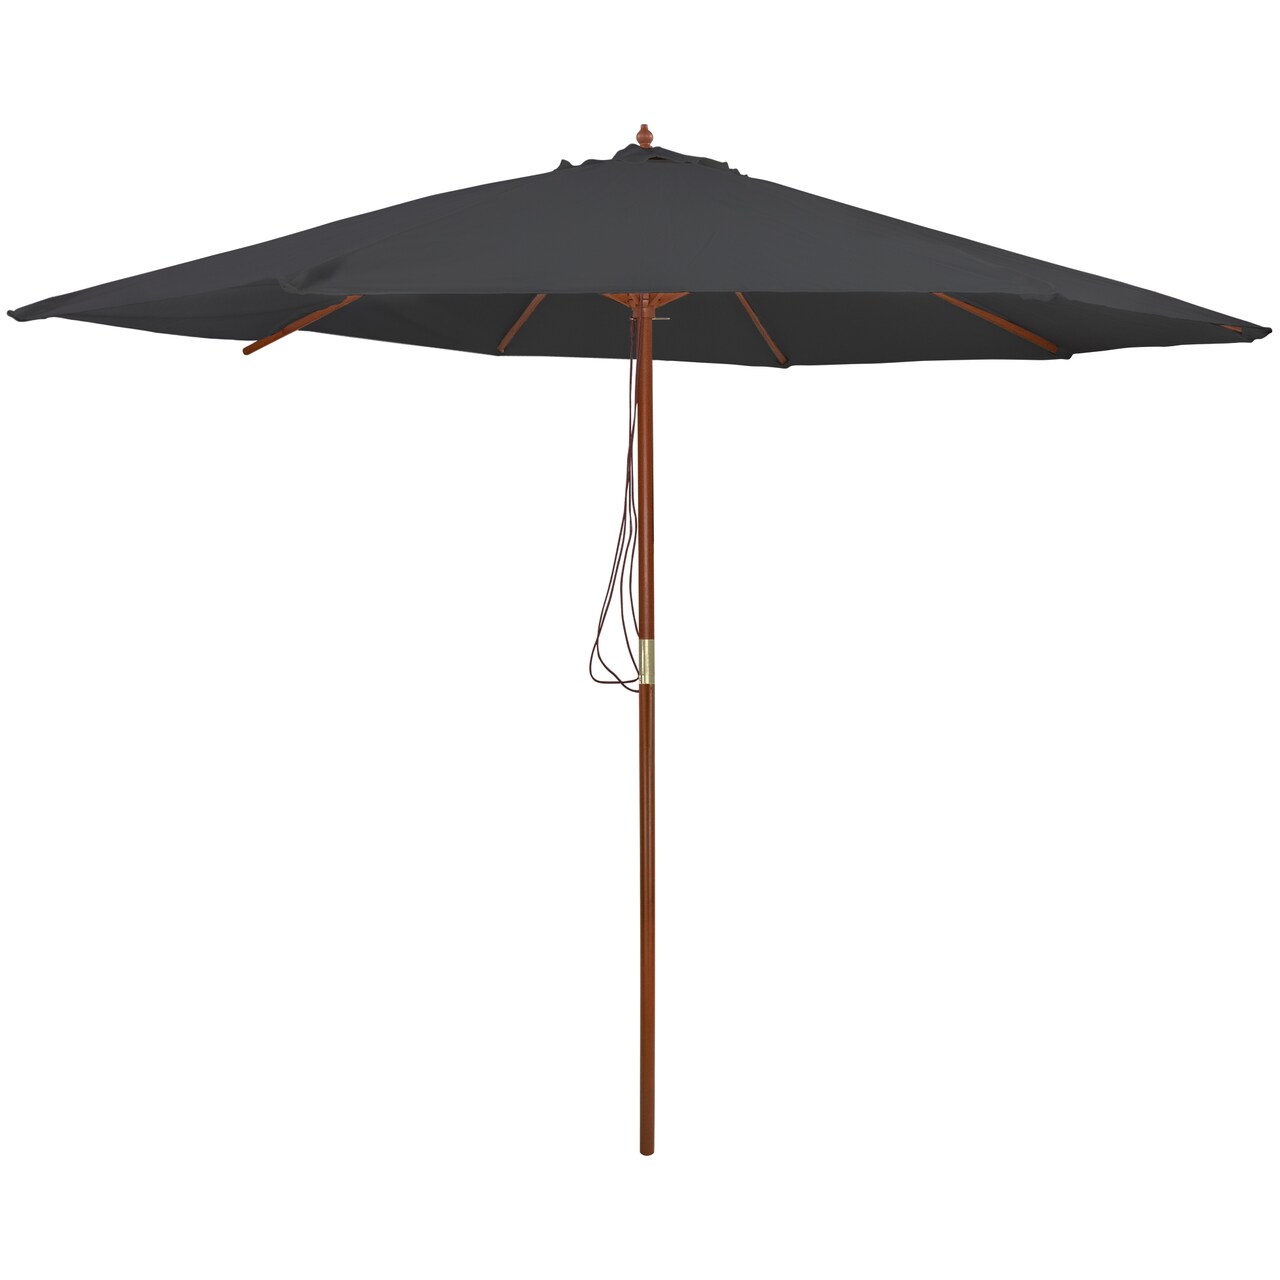 Northlight 8.5ft Outdoor Patio Market Umbrella with Wooden Pole, Gray